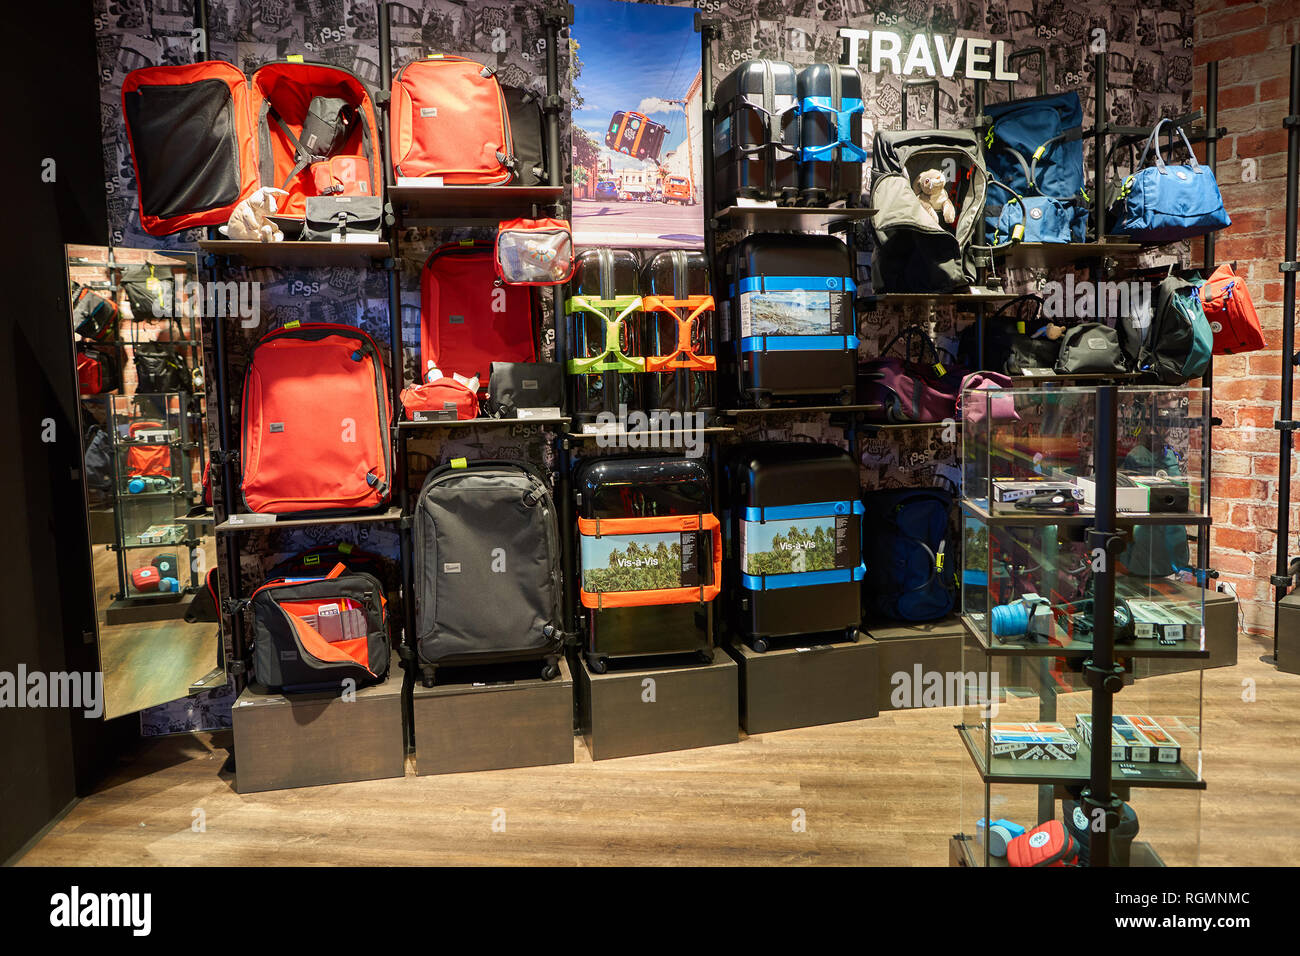 Crumpler Shop High Resolution Stock Photography and Images - Alamy